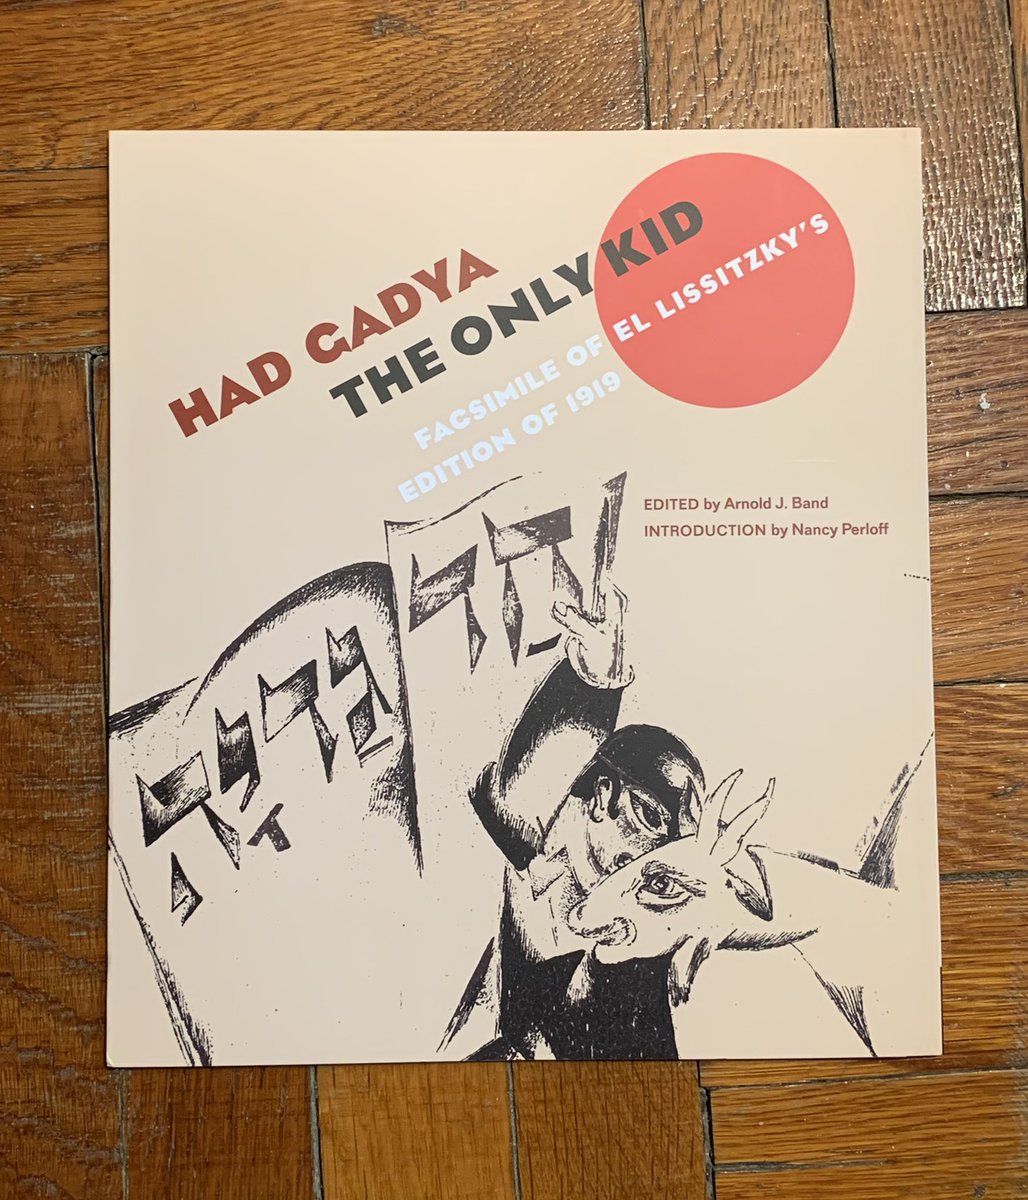 The Only Kid Facsimile of El Lissitzkys Edition of 1919 Had gadya